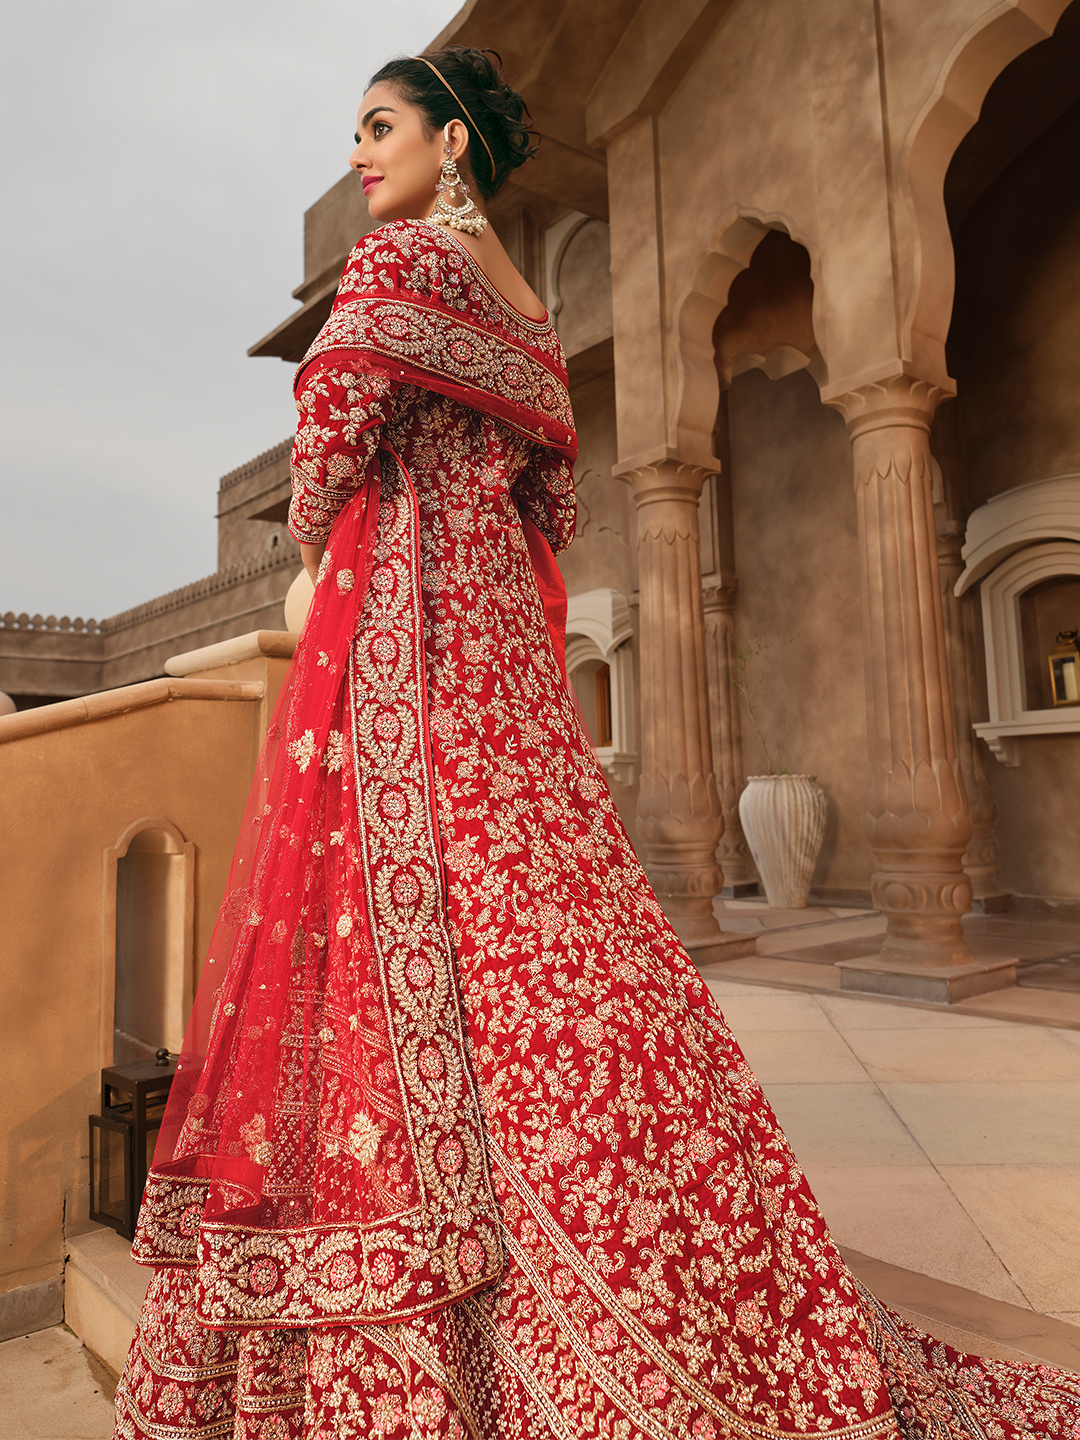 Velvet Bridal Lehenga Choli With All Over Embroidered Flower-Sequins Motif  And Beautiful Dupatta | Exotic India Art